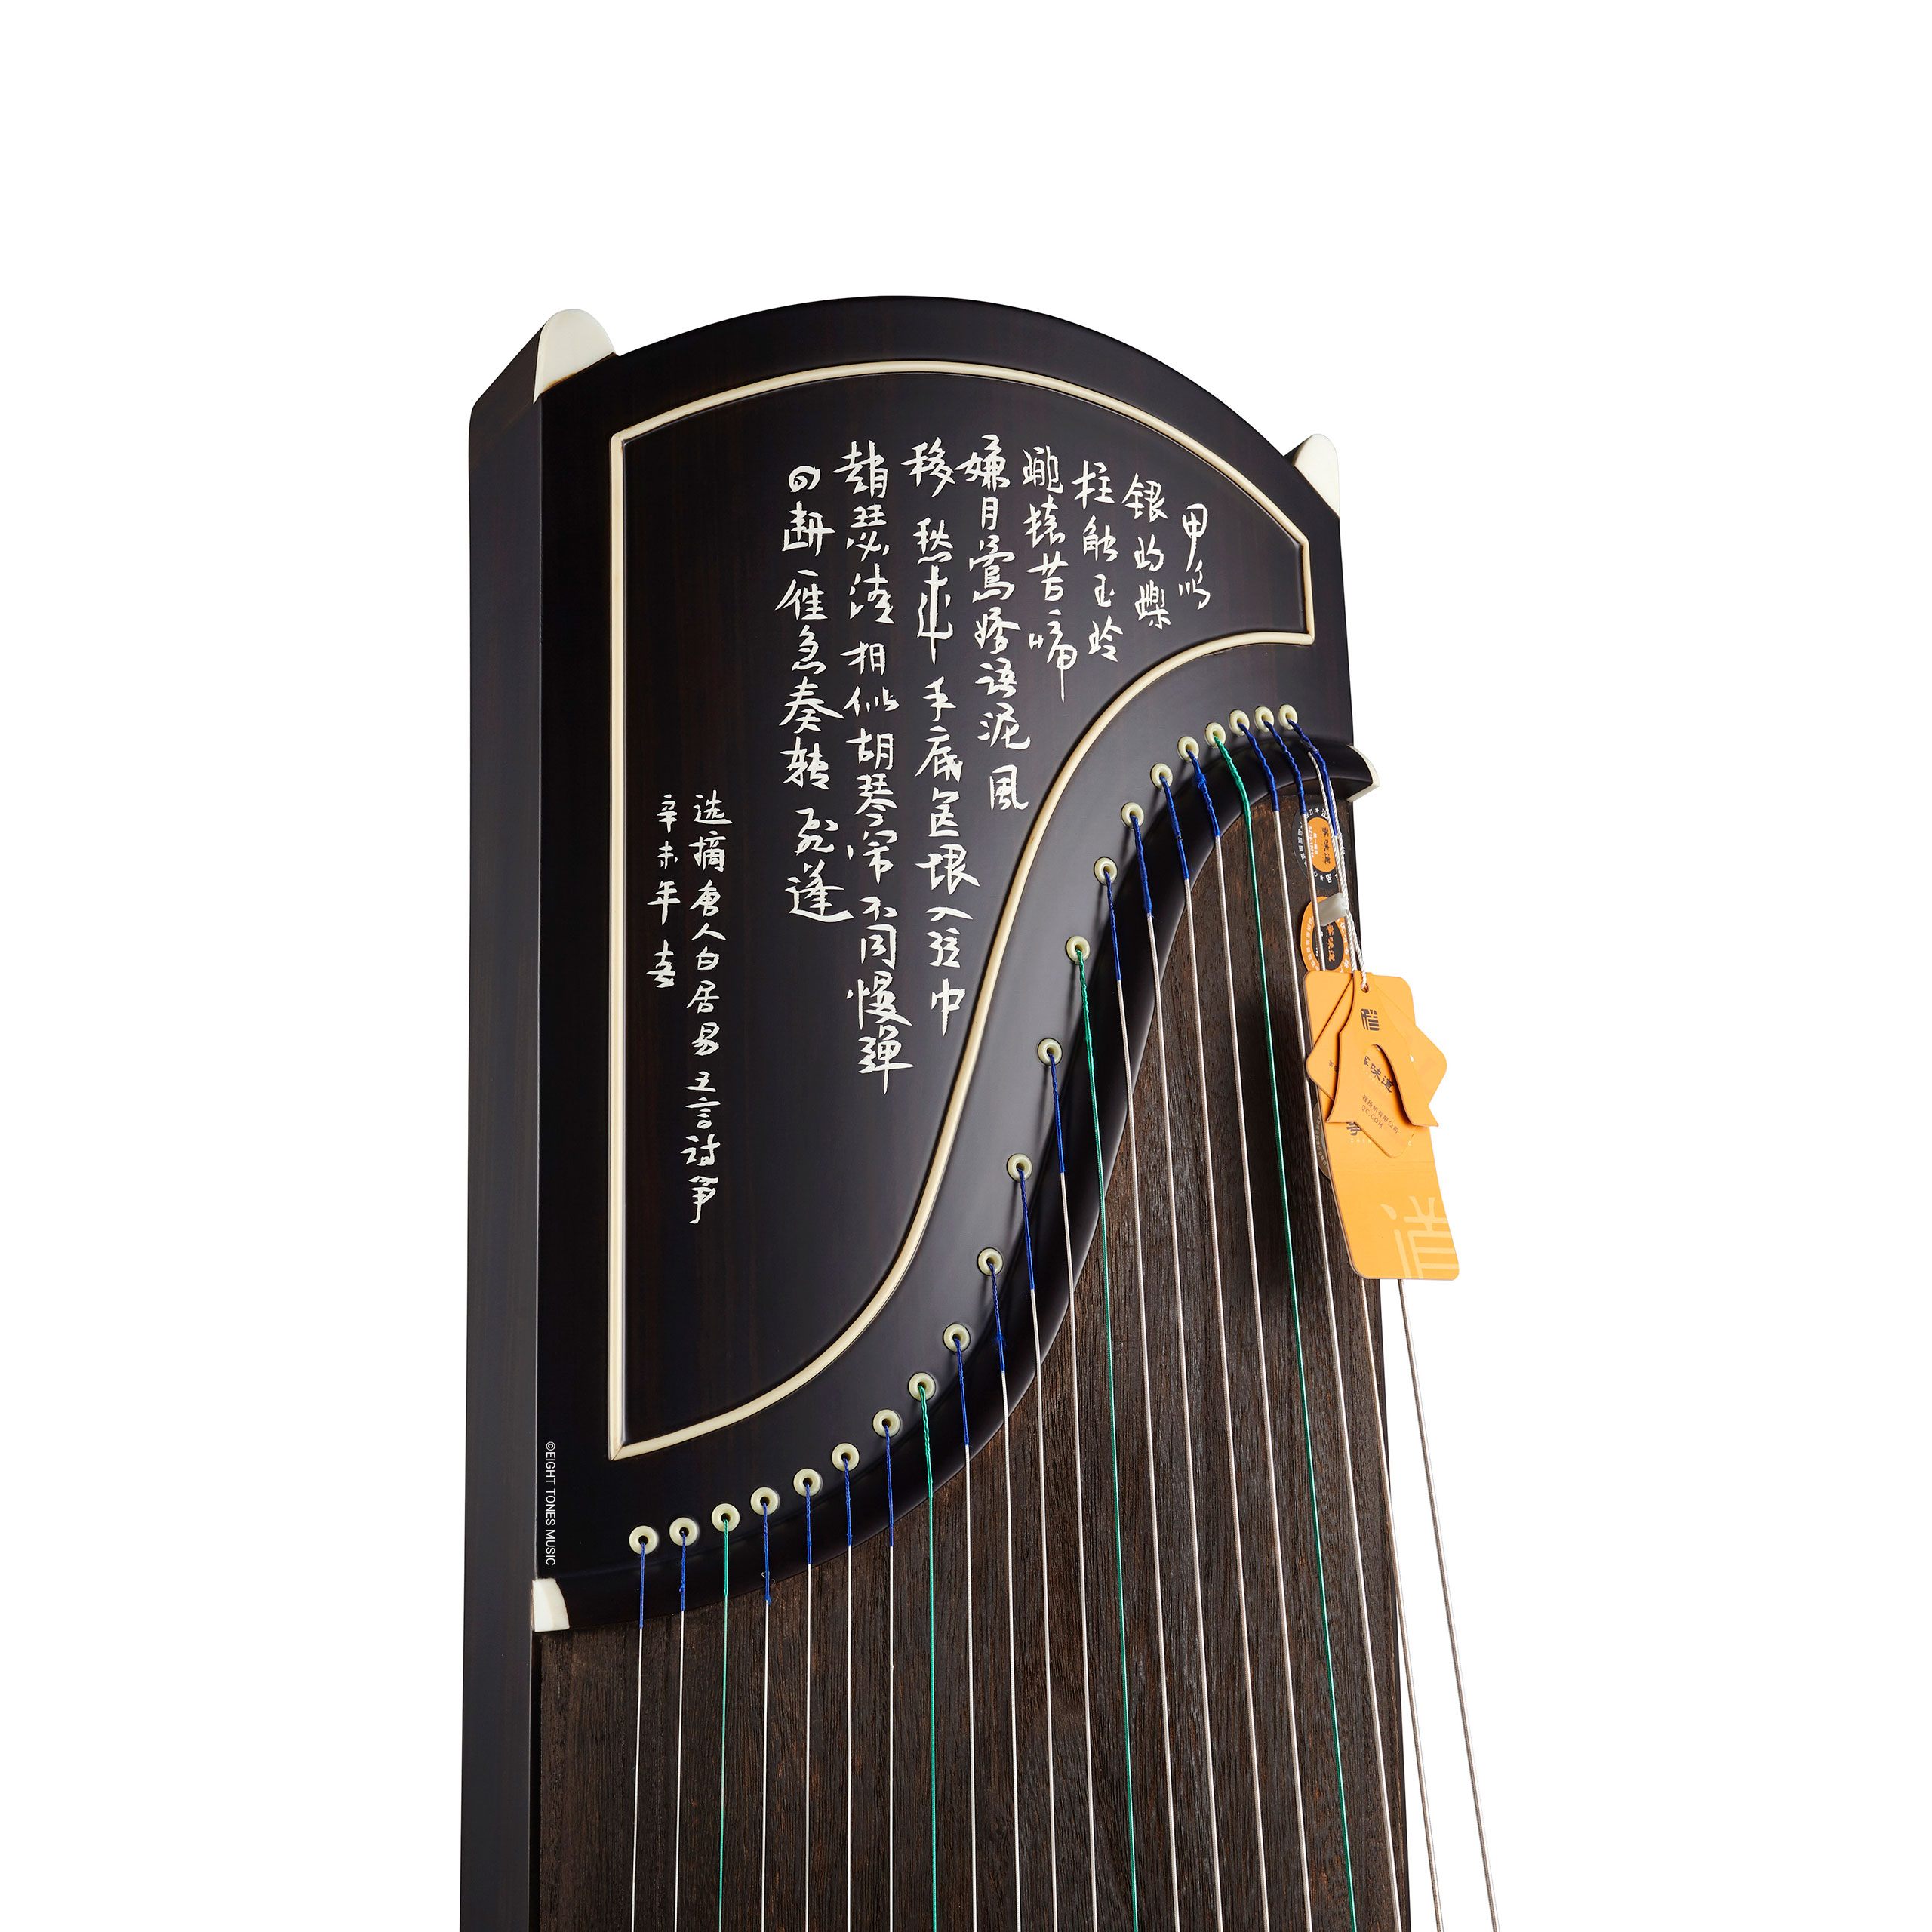 Zhonghao 'Poems In The Evenings' Black Sandalwood Guzheng Tail